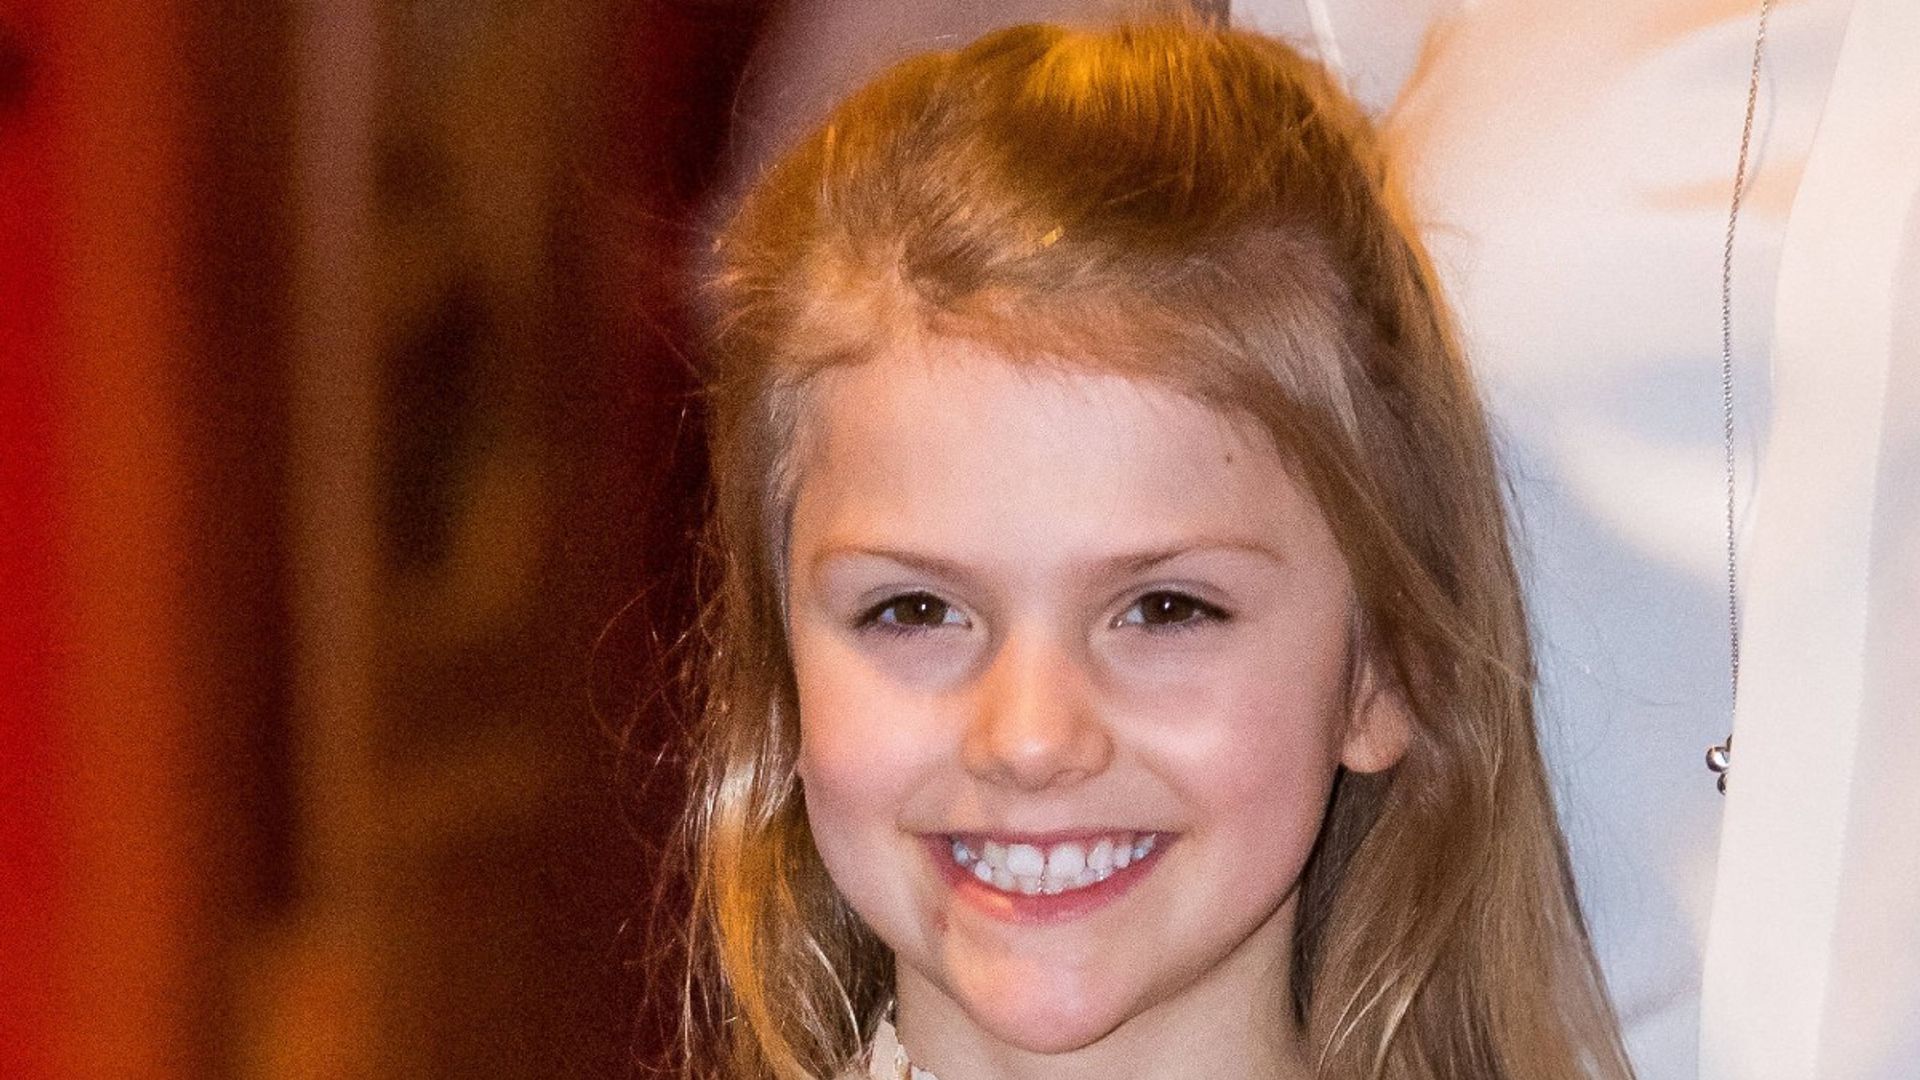 New photo released of Princess Estelle of Sweden on her birthday